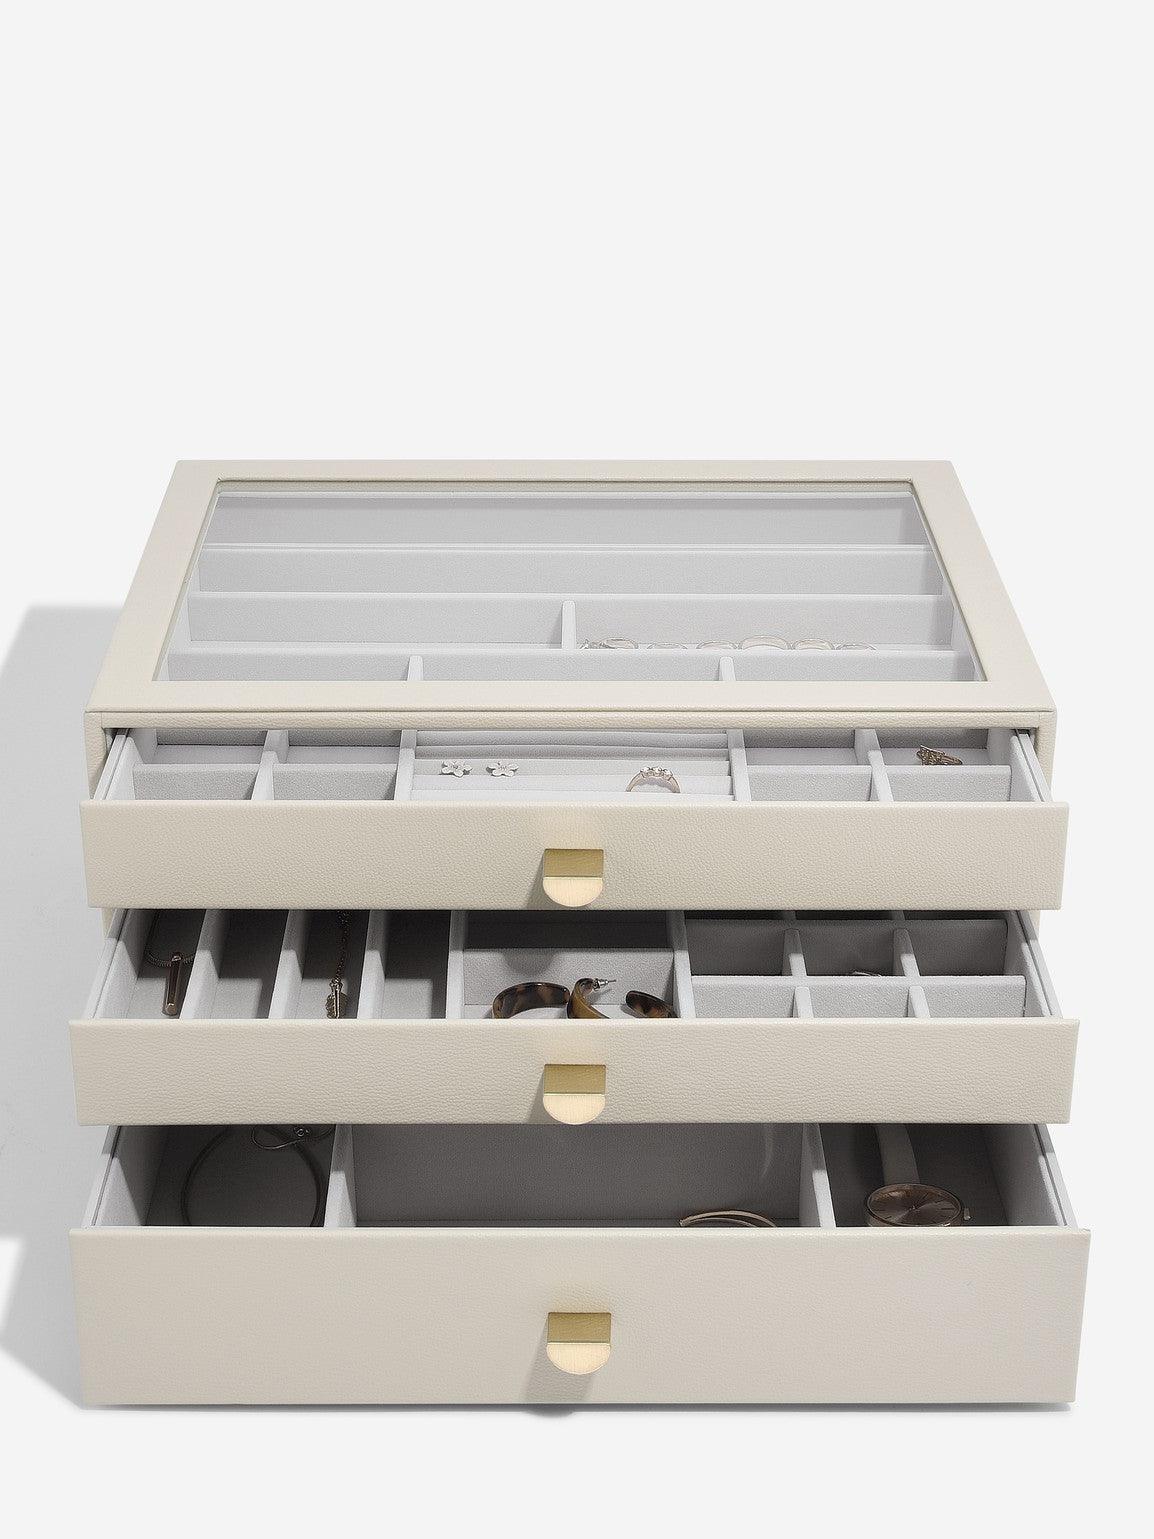 Stackers Oatmeal Supersize Jewellery Box with Drawers - Judith Hart Jewellers